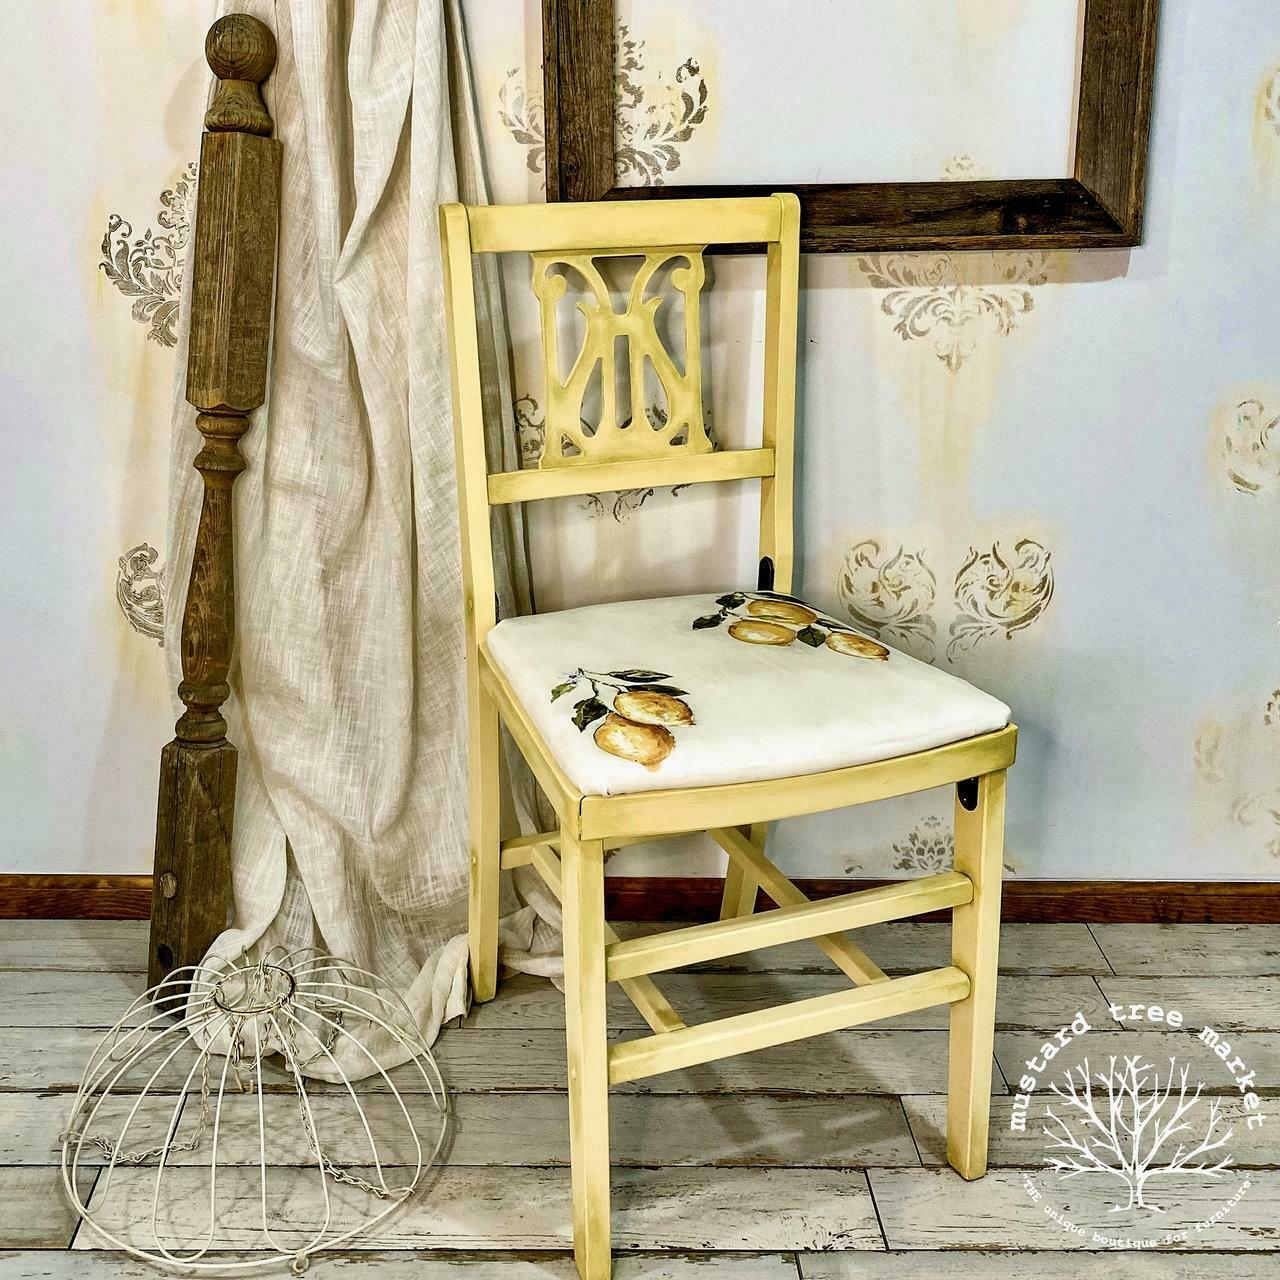 Rebel Yellow - Dixie Belle Chalk Mineral Paint